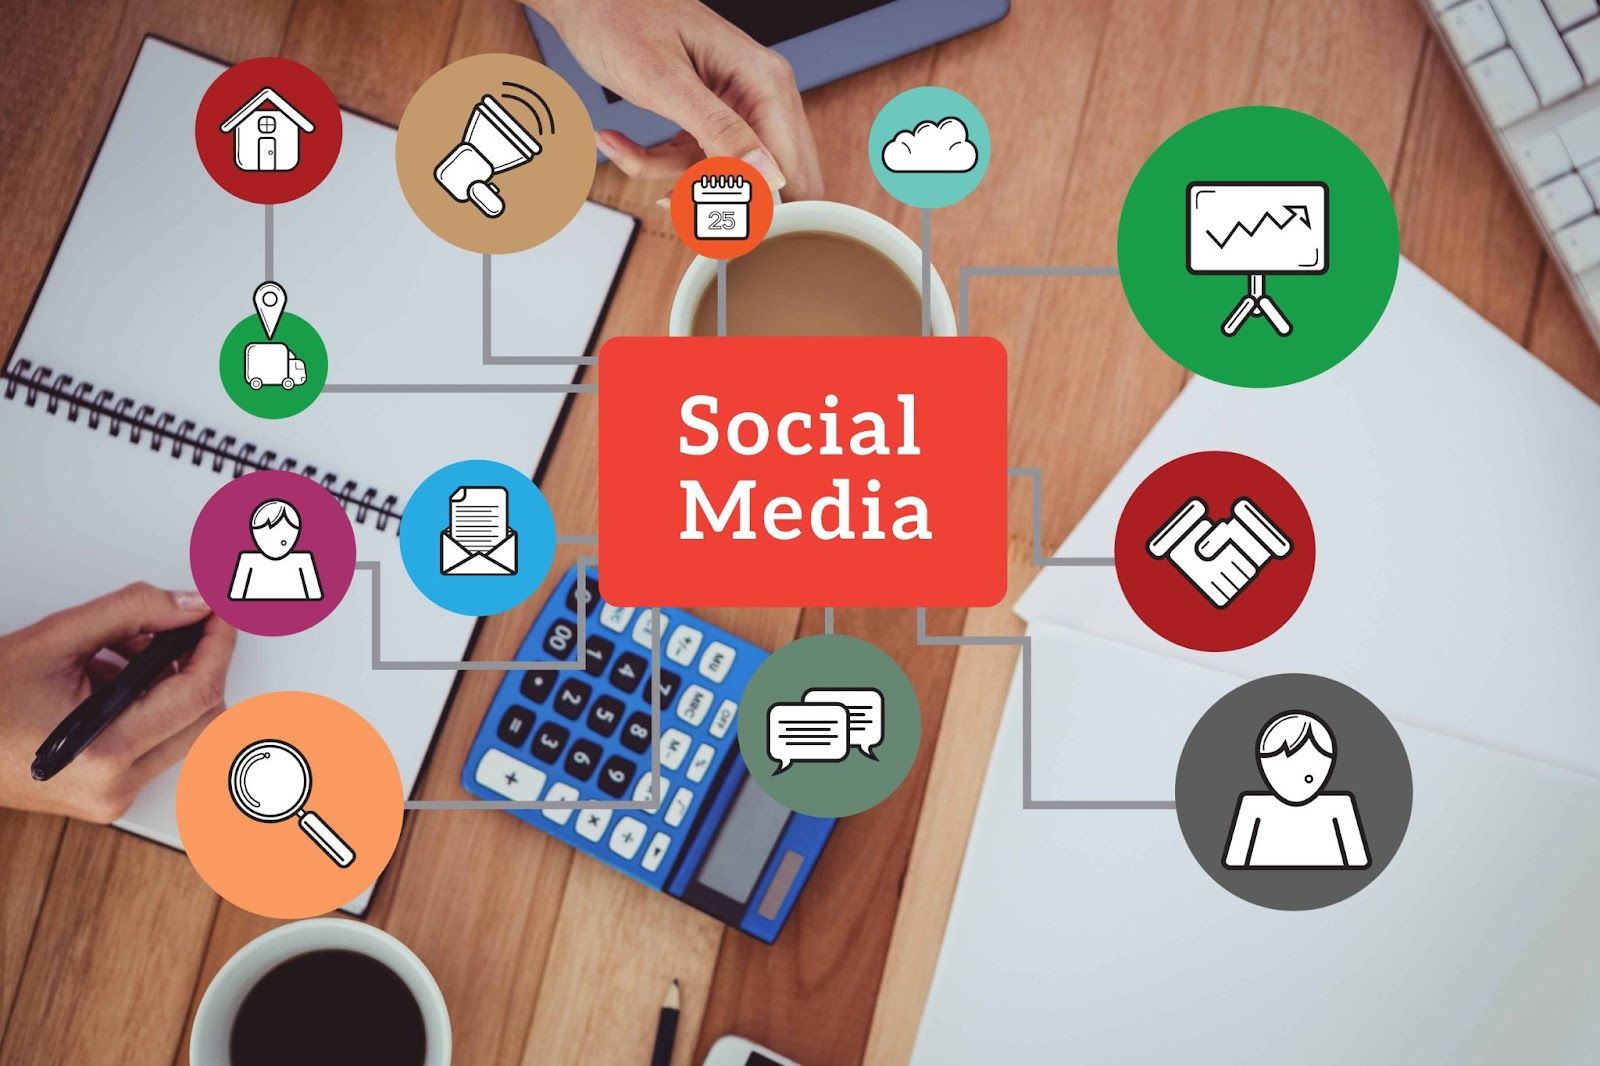 One potential recurring revenue source is to manage your customers’ social media accounts.